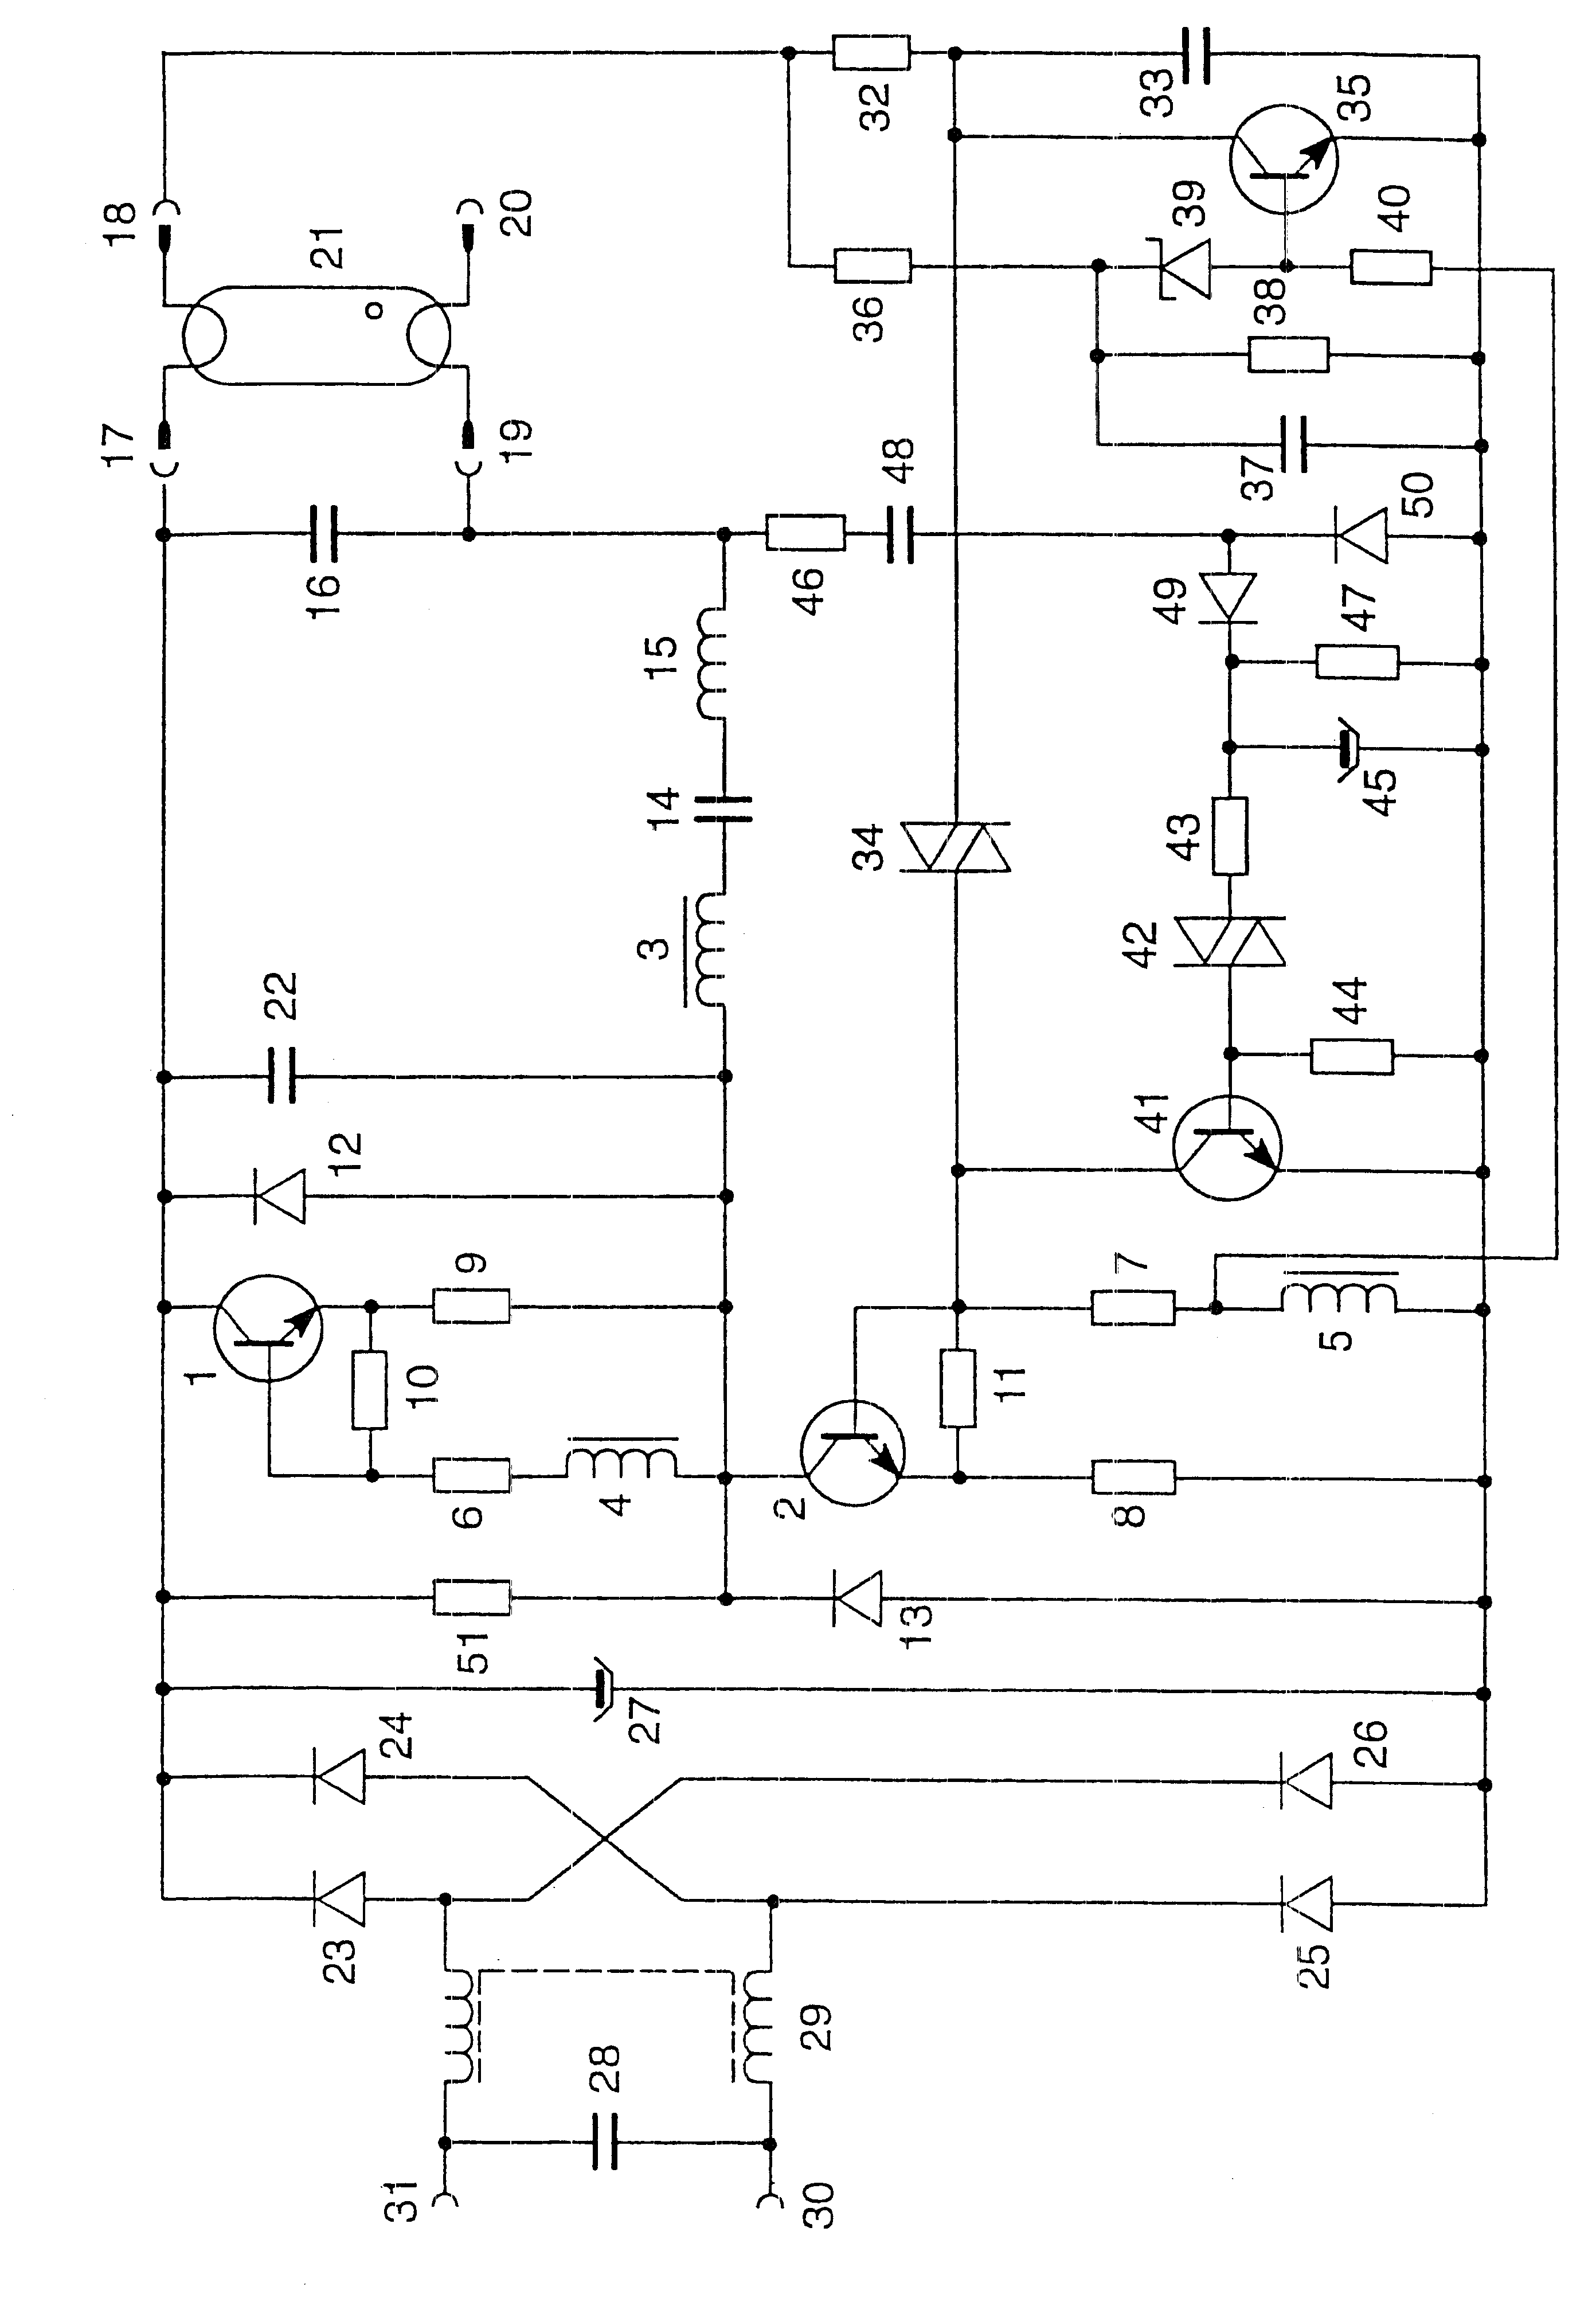 Circuit arrangement for operating electric lamps